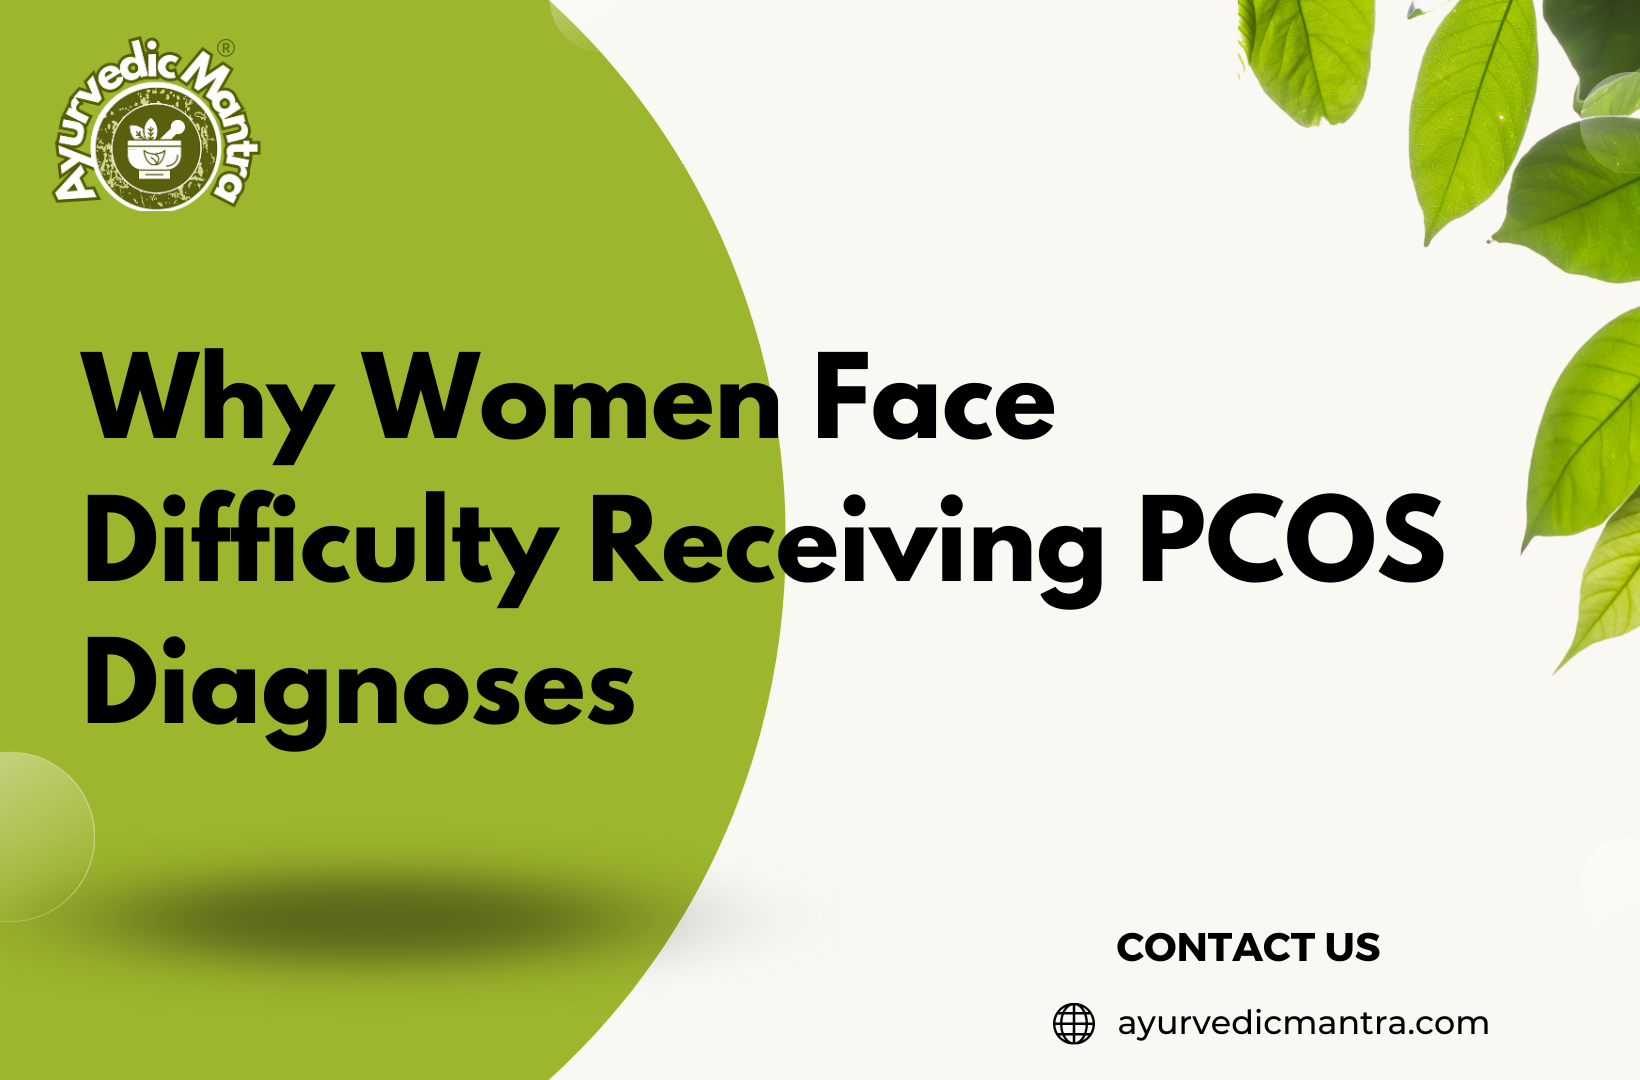 Why Women Face Difficulty Receiving PCOS Diagnoses